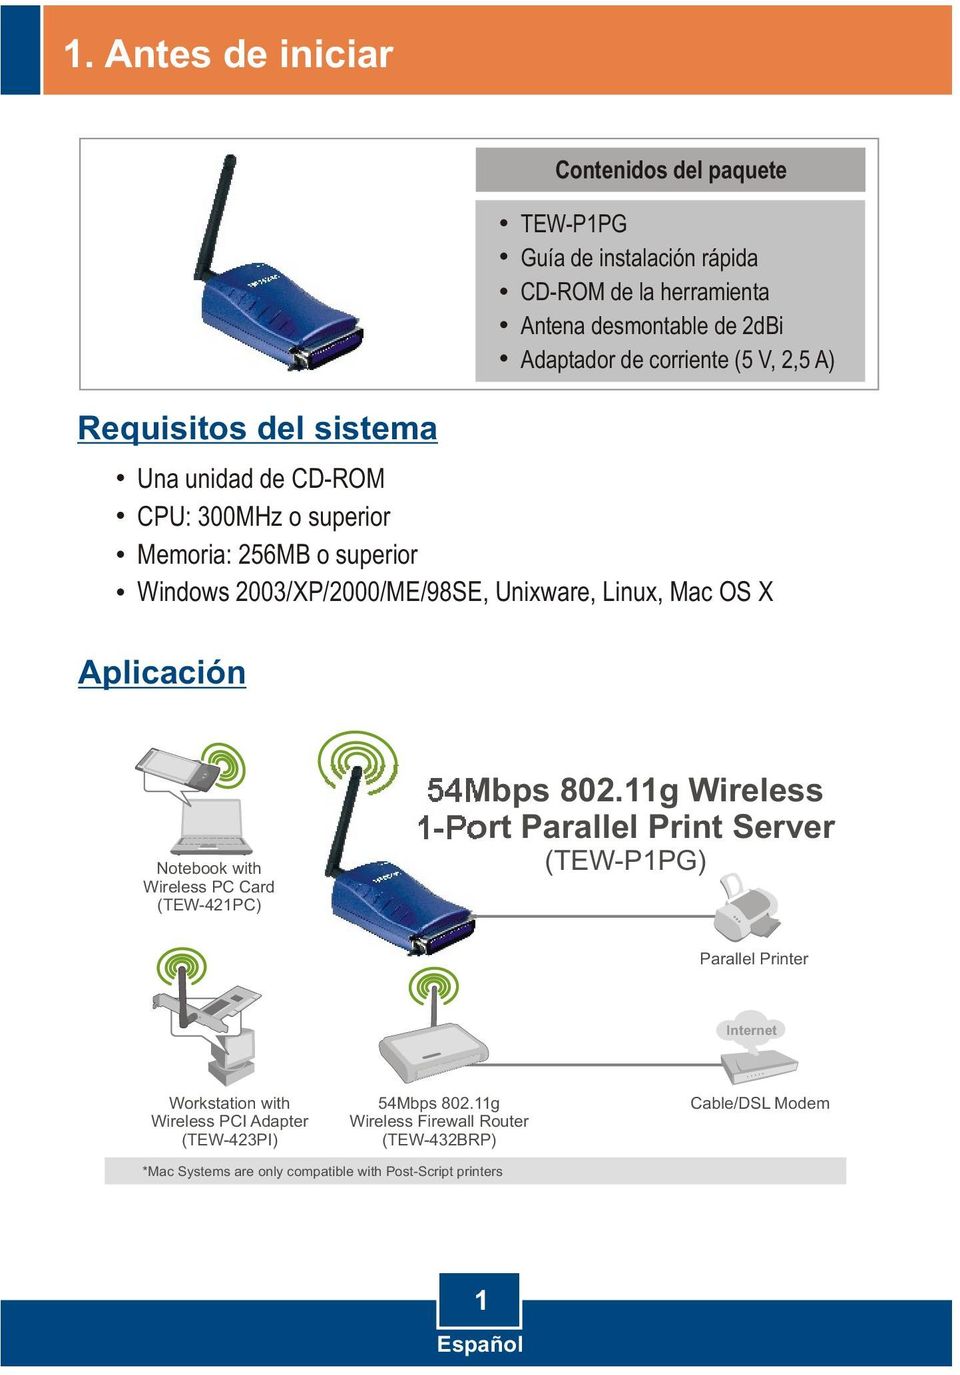 Aplicación Notebook with Wireless PC Card (TEW-421PC) 54Mbps 802.